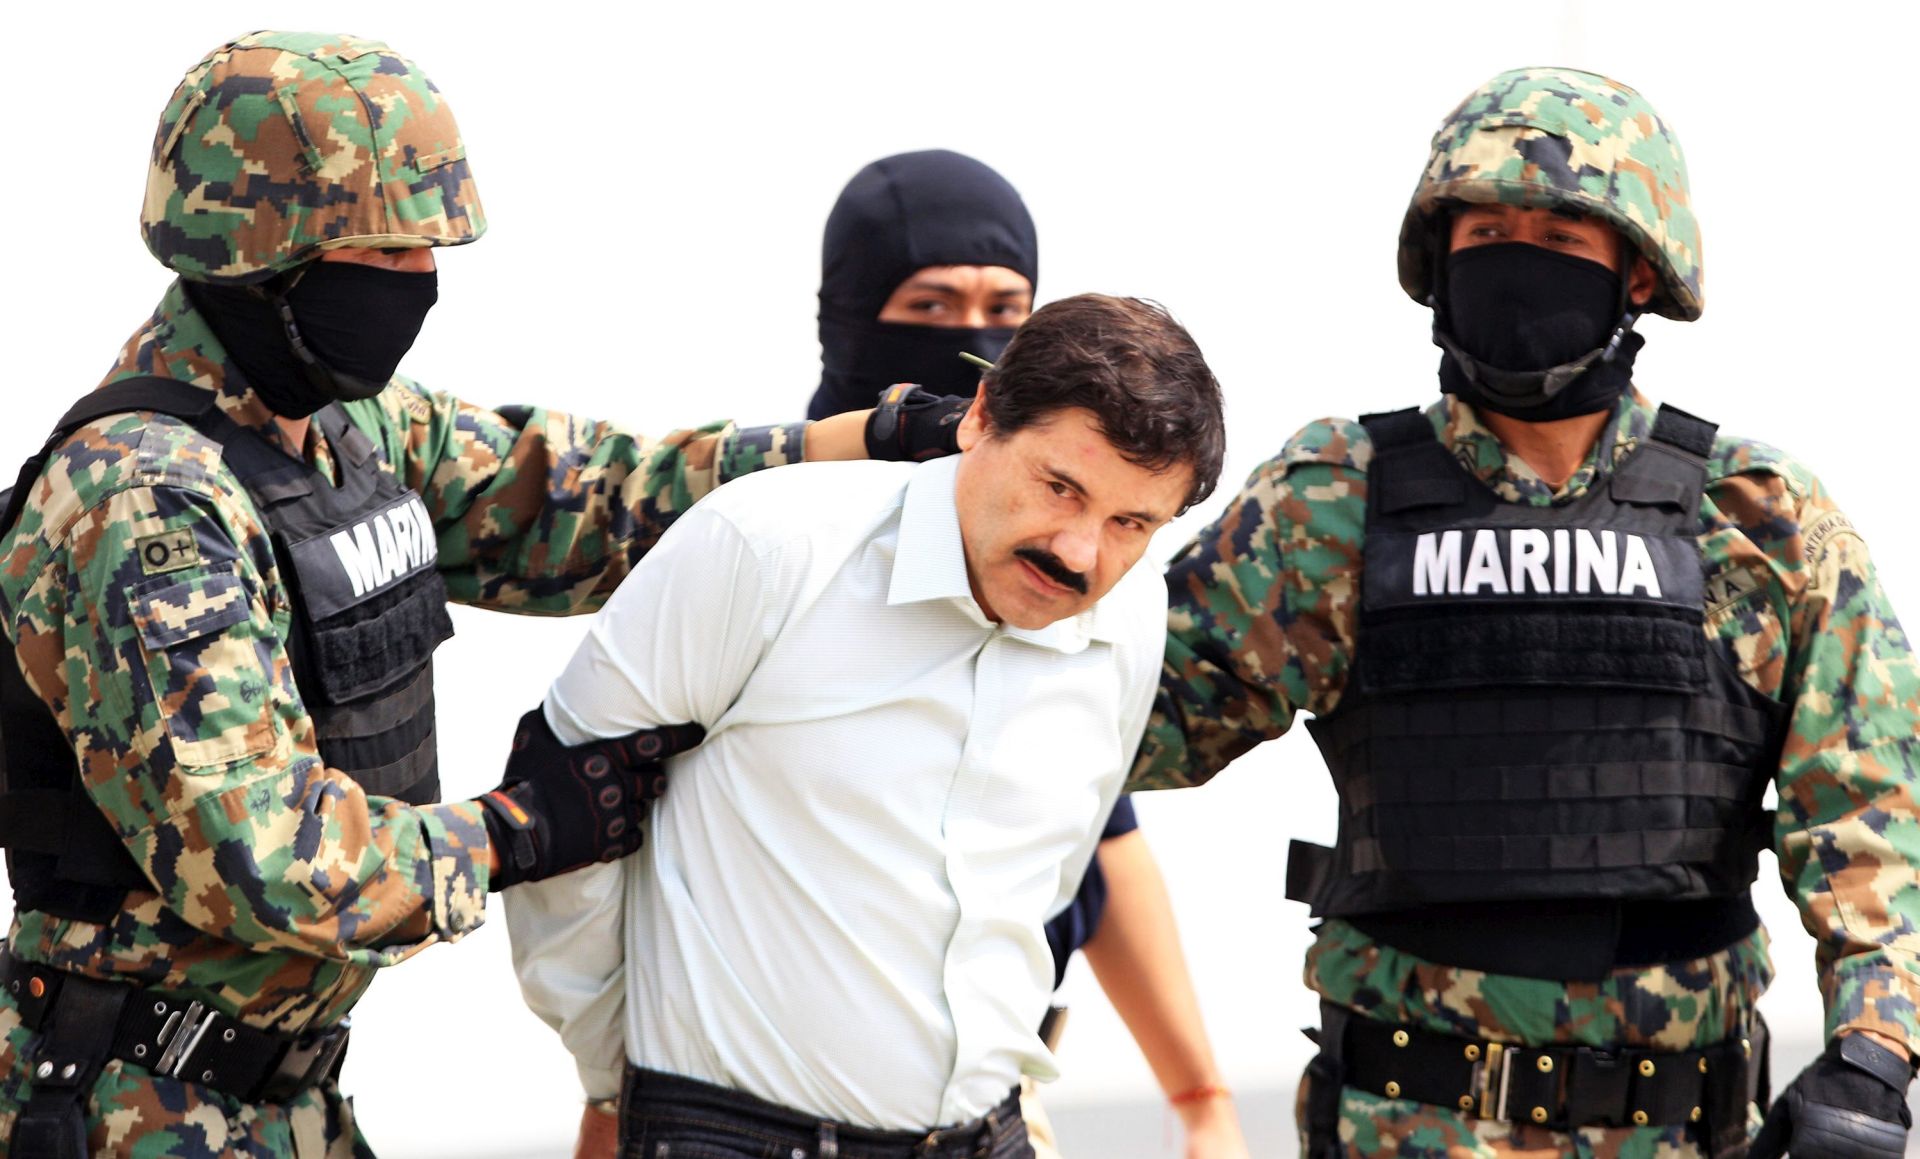 epa05093160 (FILE) Undated file picture taken to Mexican drug lord Joaquín "El Chapo" Guzman, after been recaptured in 2014, and presented by the authorities, in Mexico City. Mexican President, Enrique Peña Nieto, annouced the recapturing, on 08 January 2016, of Chapo Guzman, leader of the Sinaloa cartel, who was been fugitive from Justice after fleeding from a Mexican prision for a second time last 11 July 2015.  EPA/MARIO GUZMAN